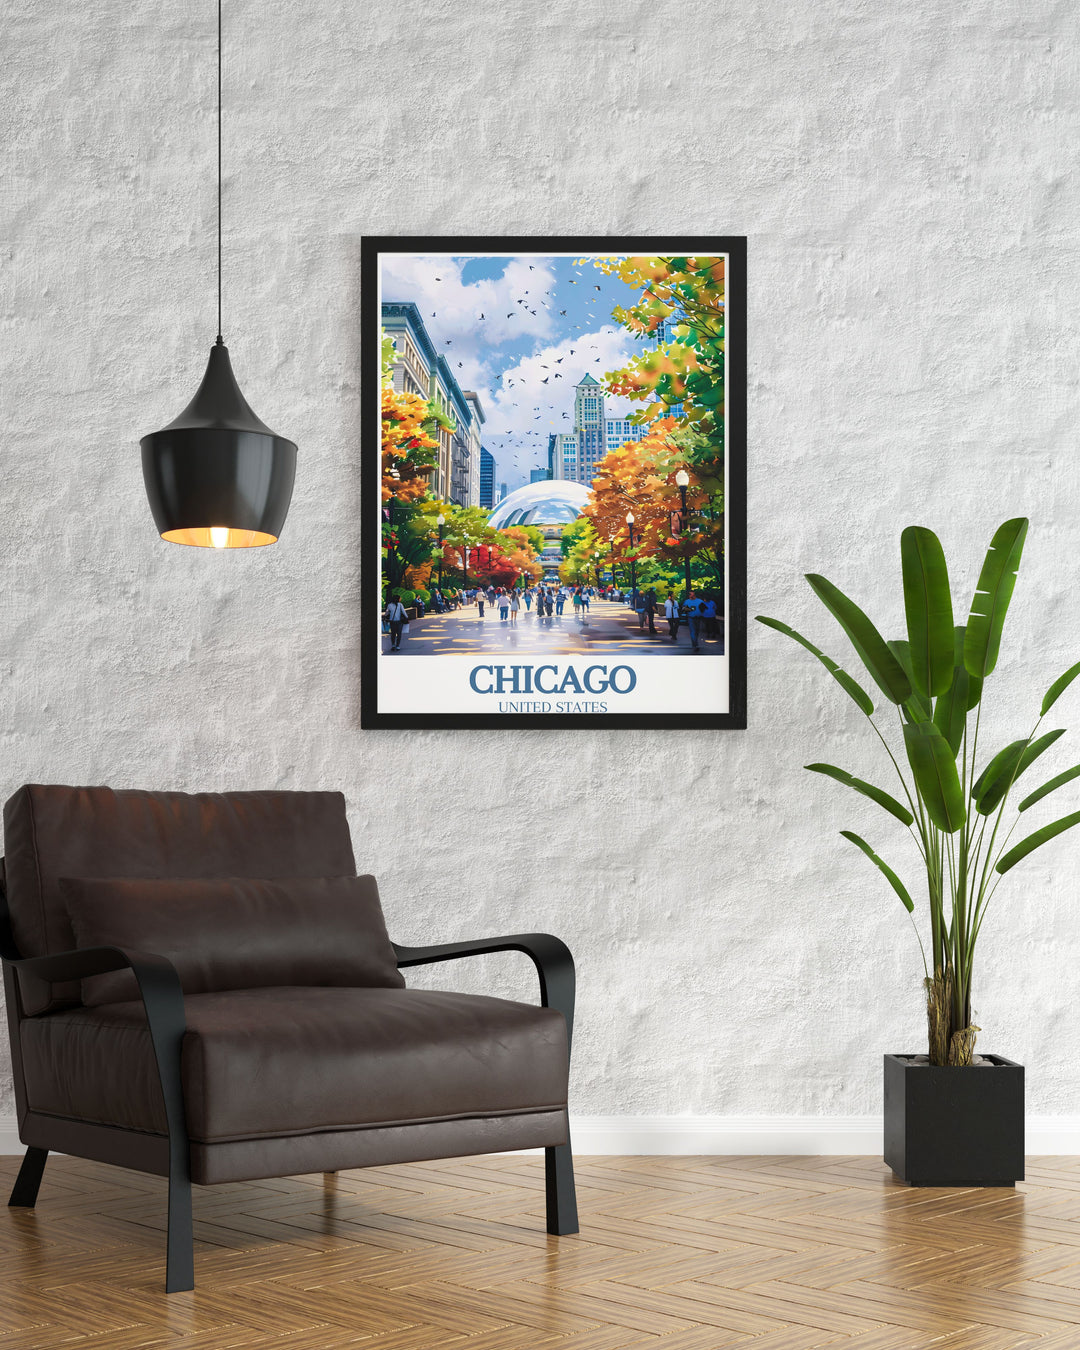 Showcasing the striking design of Cloud Gate, this poster adds a unique touch of Chicagos modern art to your decor. Experience the vibrant beauty of Millennium Park with this art print, highlighting the citys innovative spirit and rich history.